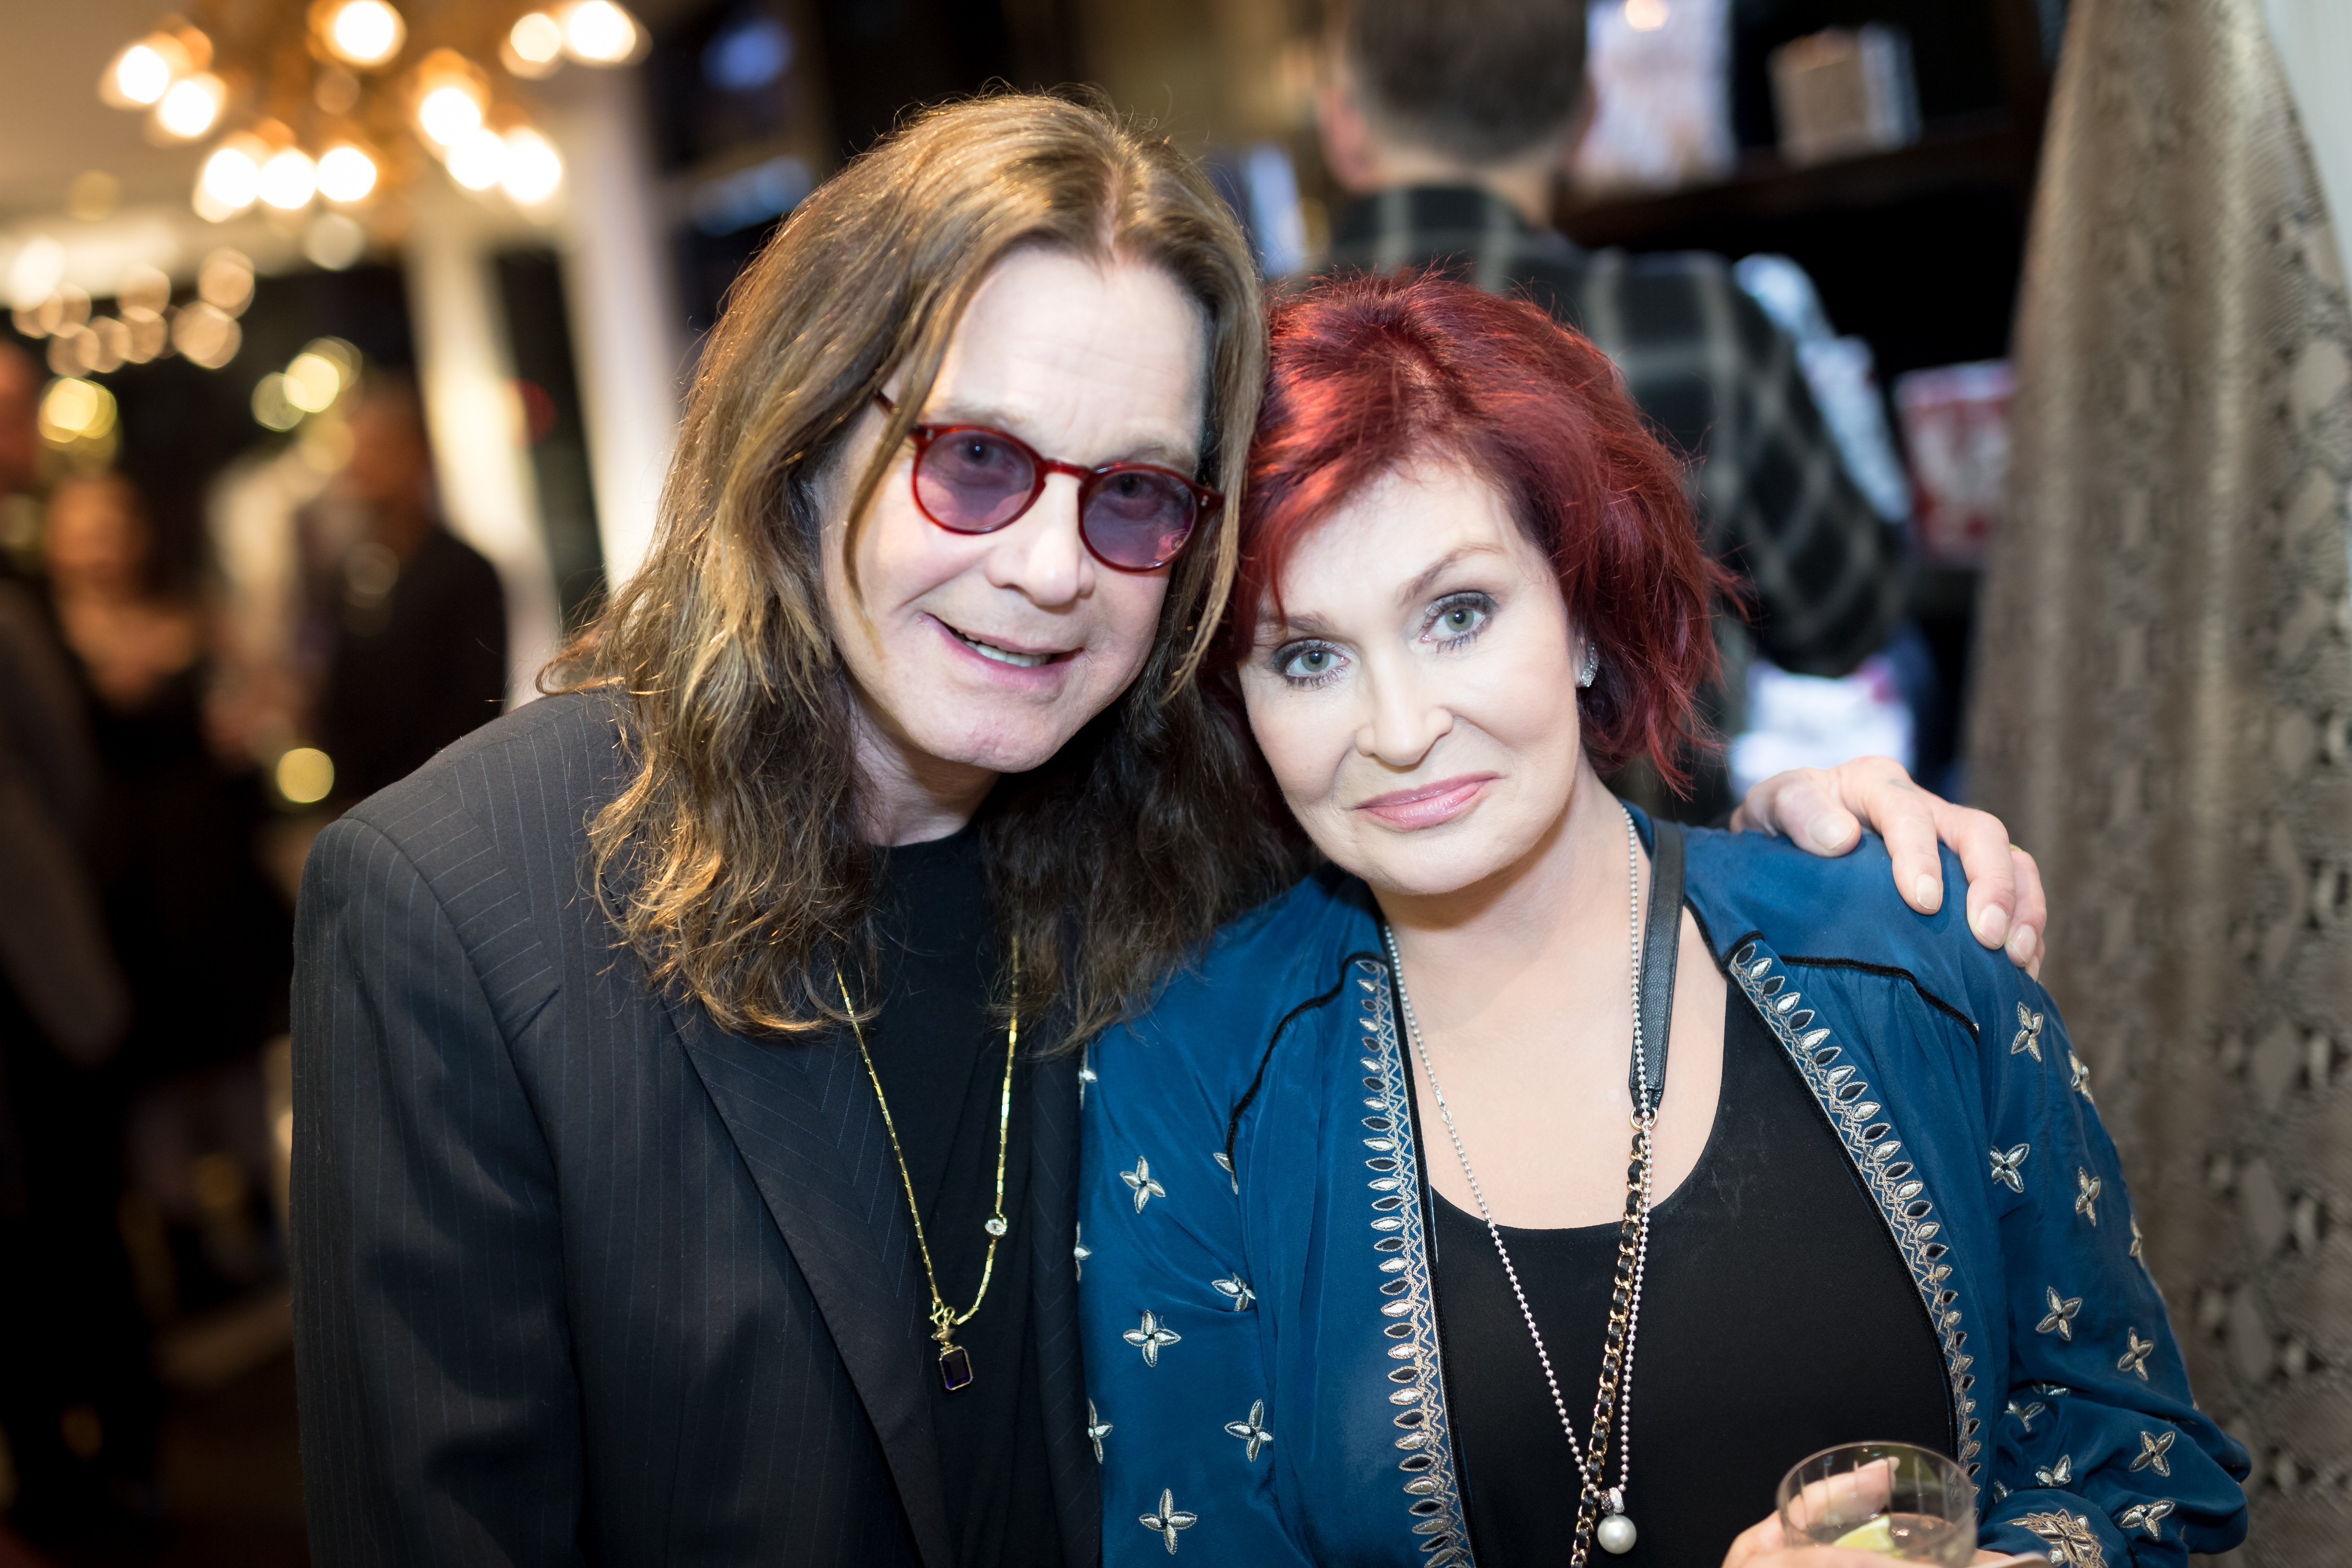 Ozzy Osbourne and Sharon Osbourne attend the Billy Morrison Aude Somnia Solo Exhibition at Elisabeth Weinstock on September 28, 2017 in Los Angeles, California | Source: Getty Images